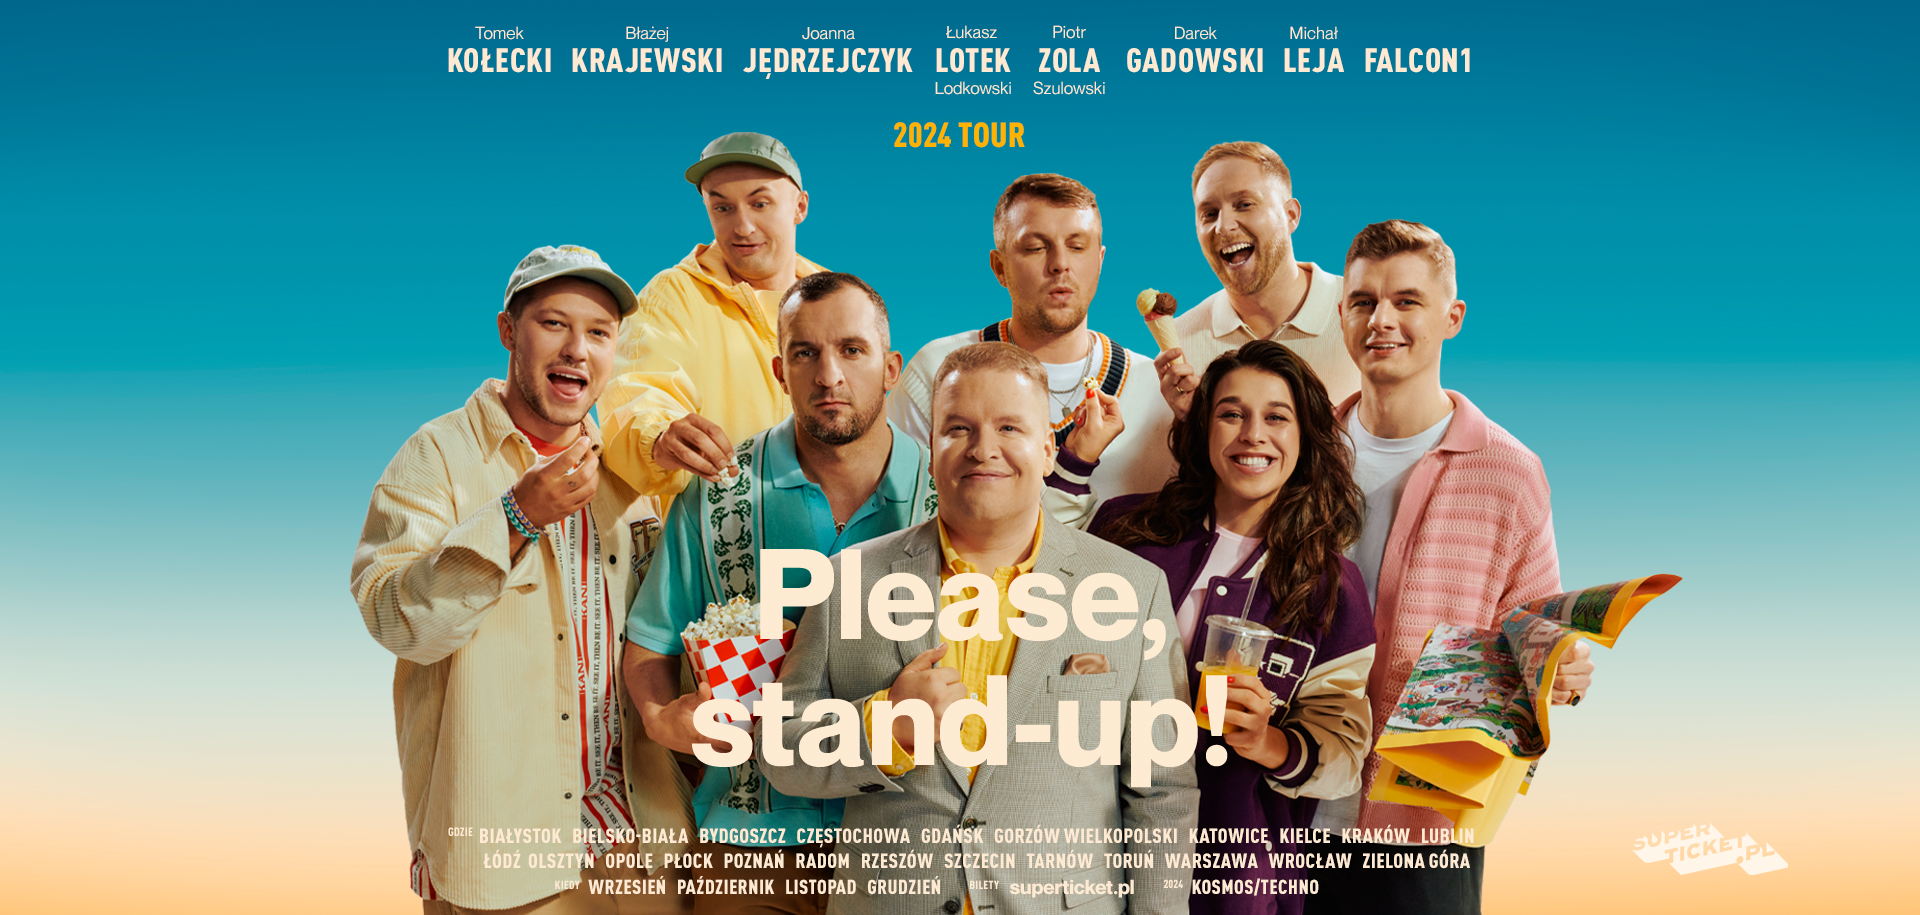 Please, Stand-up! Katowice 2024